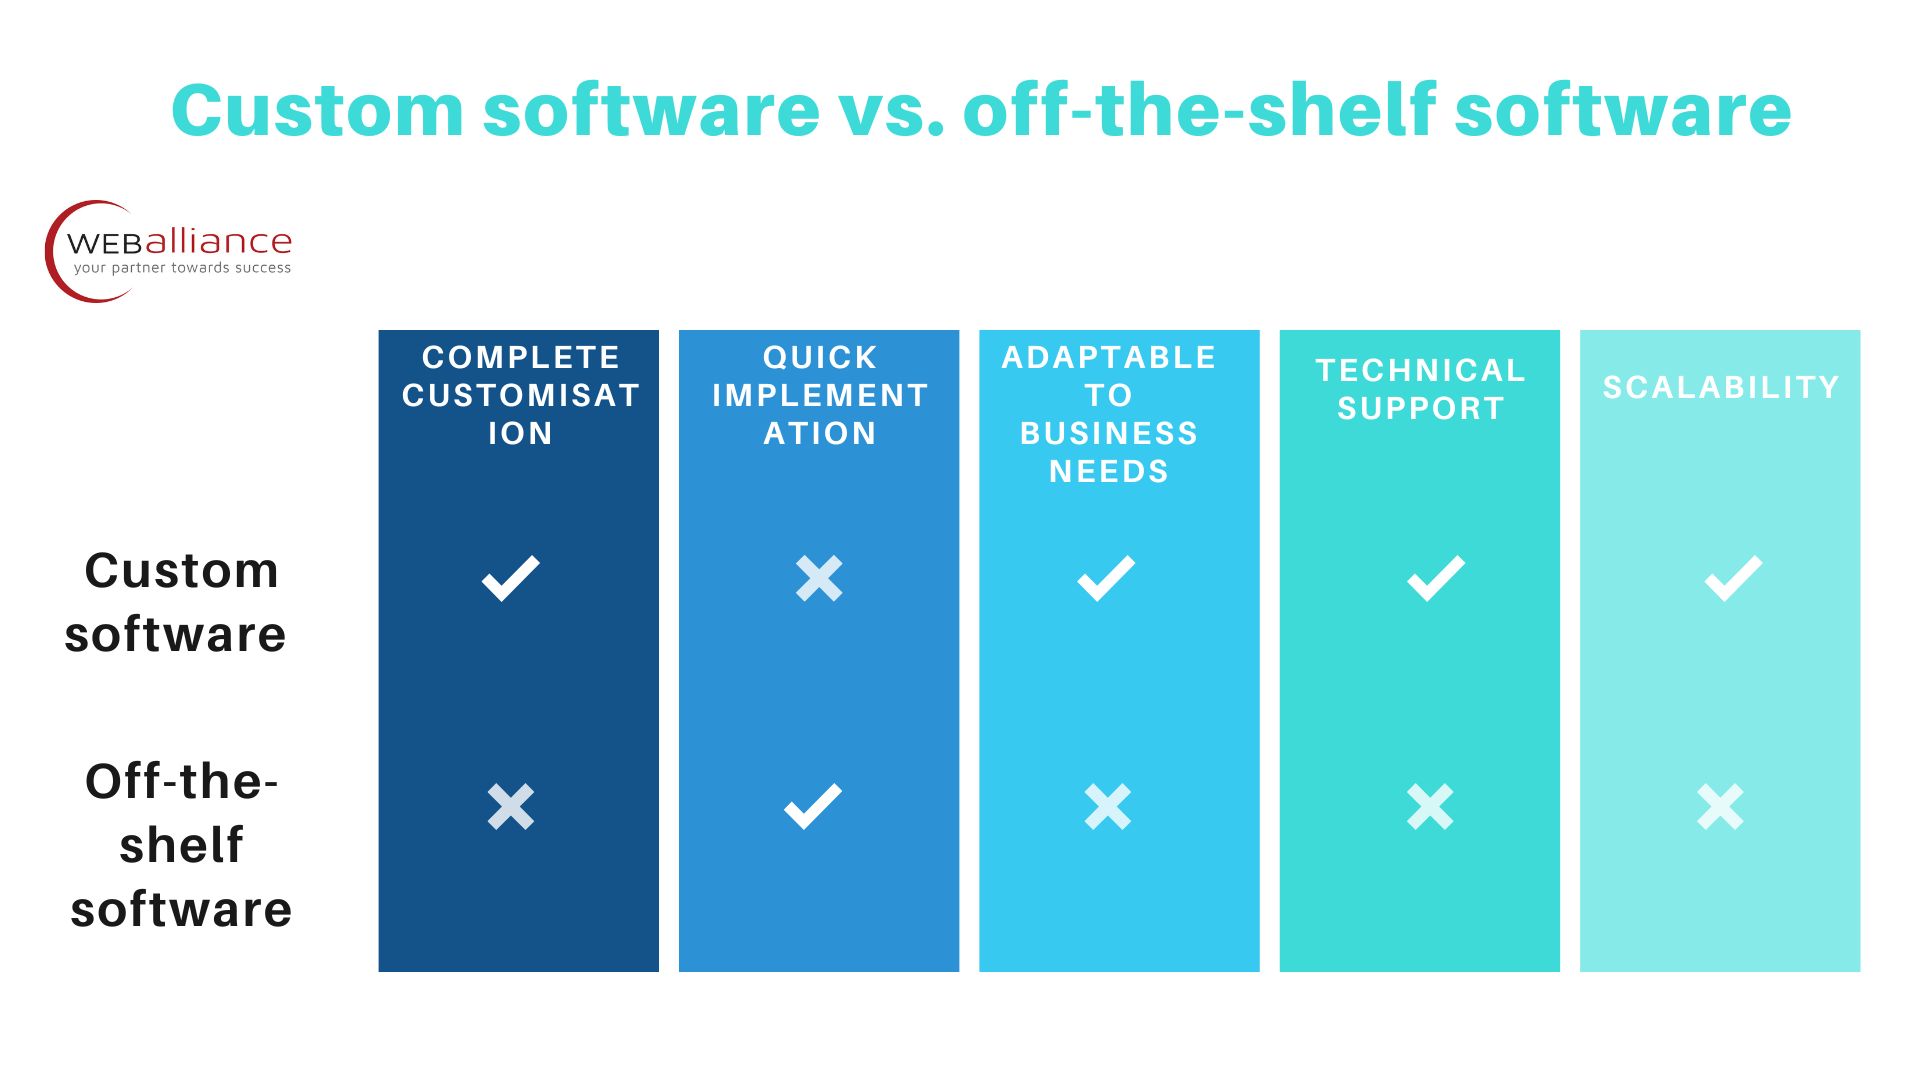 How Custom CRM is better than Off-the-shelf software